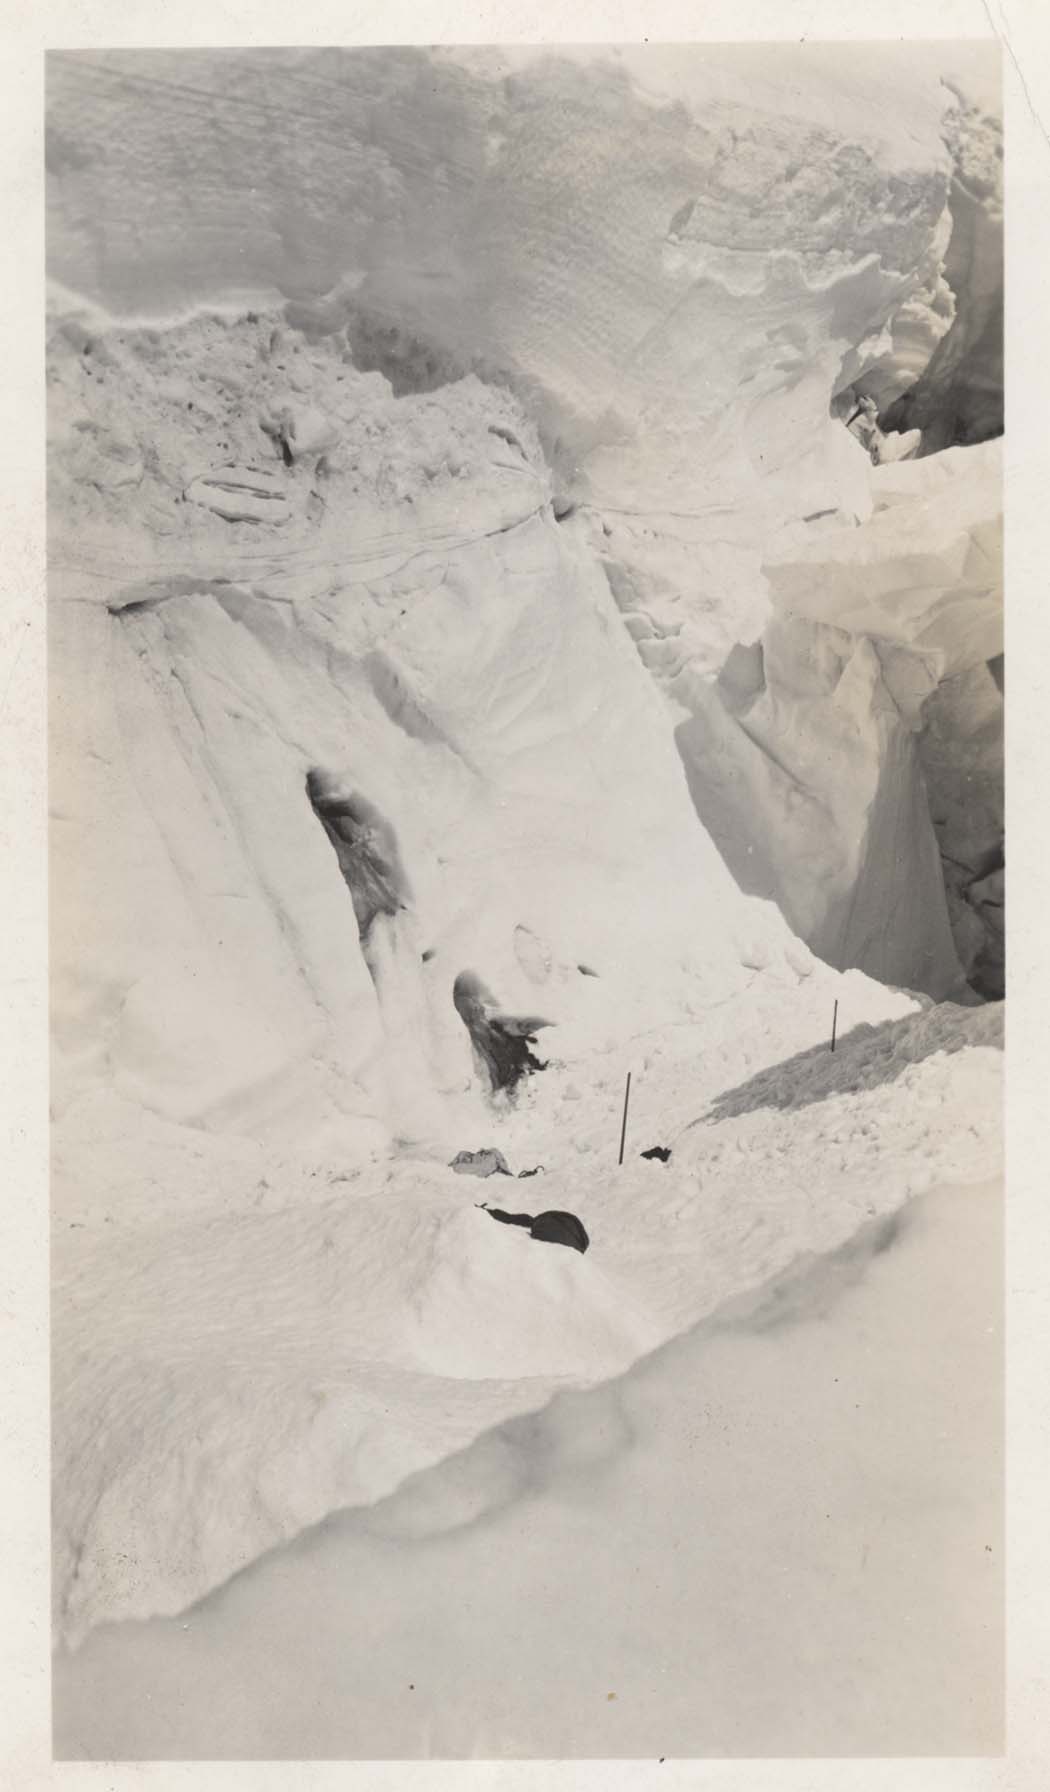 Crevasse Where Victims Were Swept And Buried (Baker1939-4.jpg)